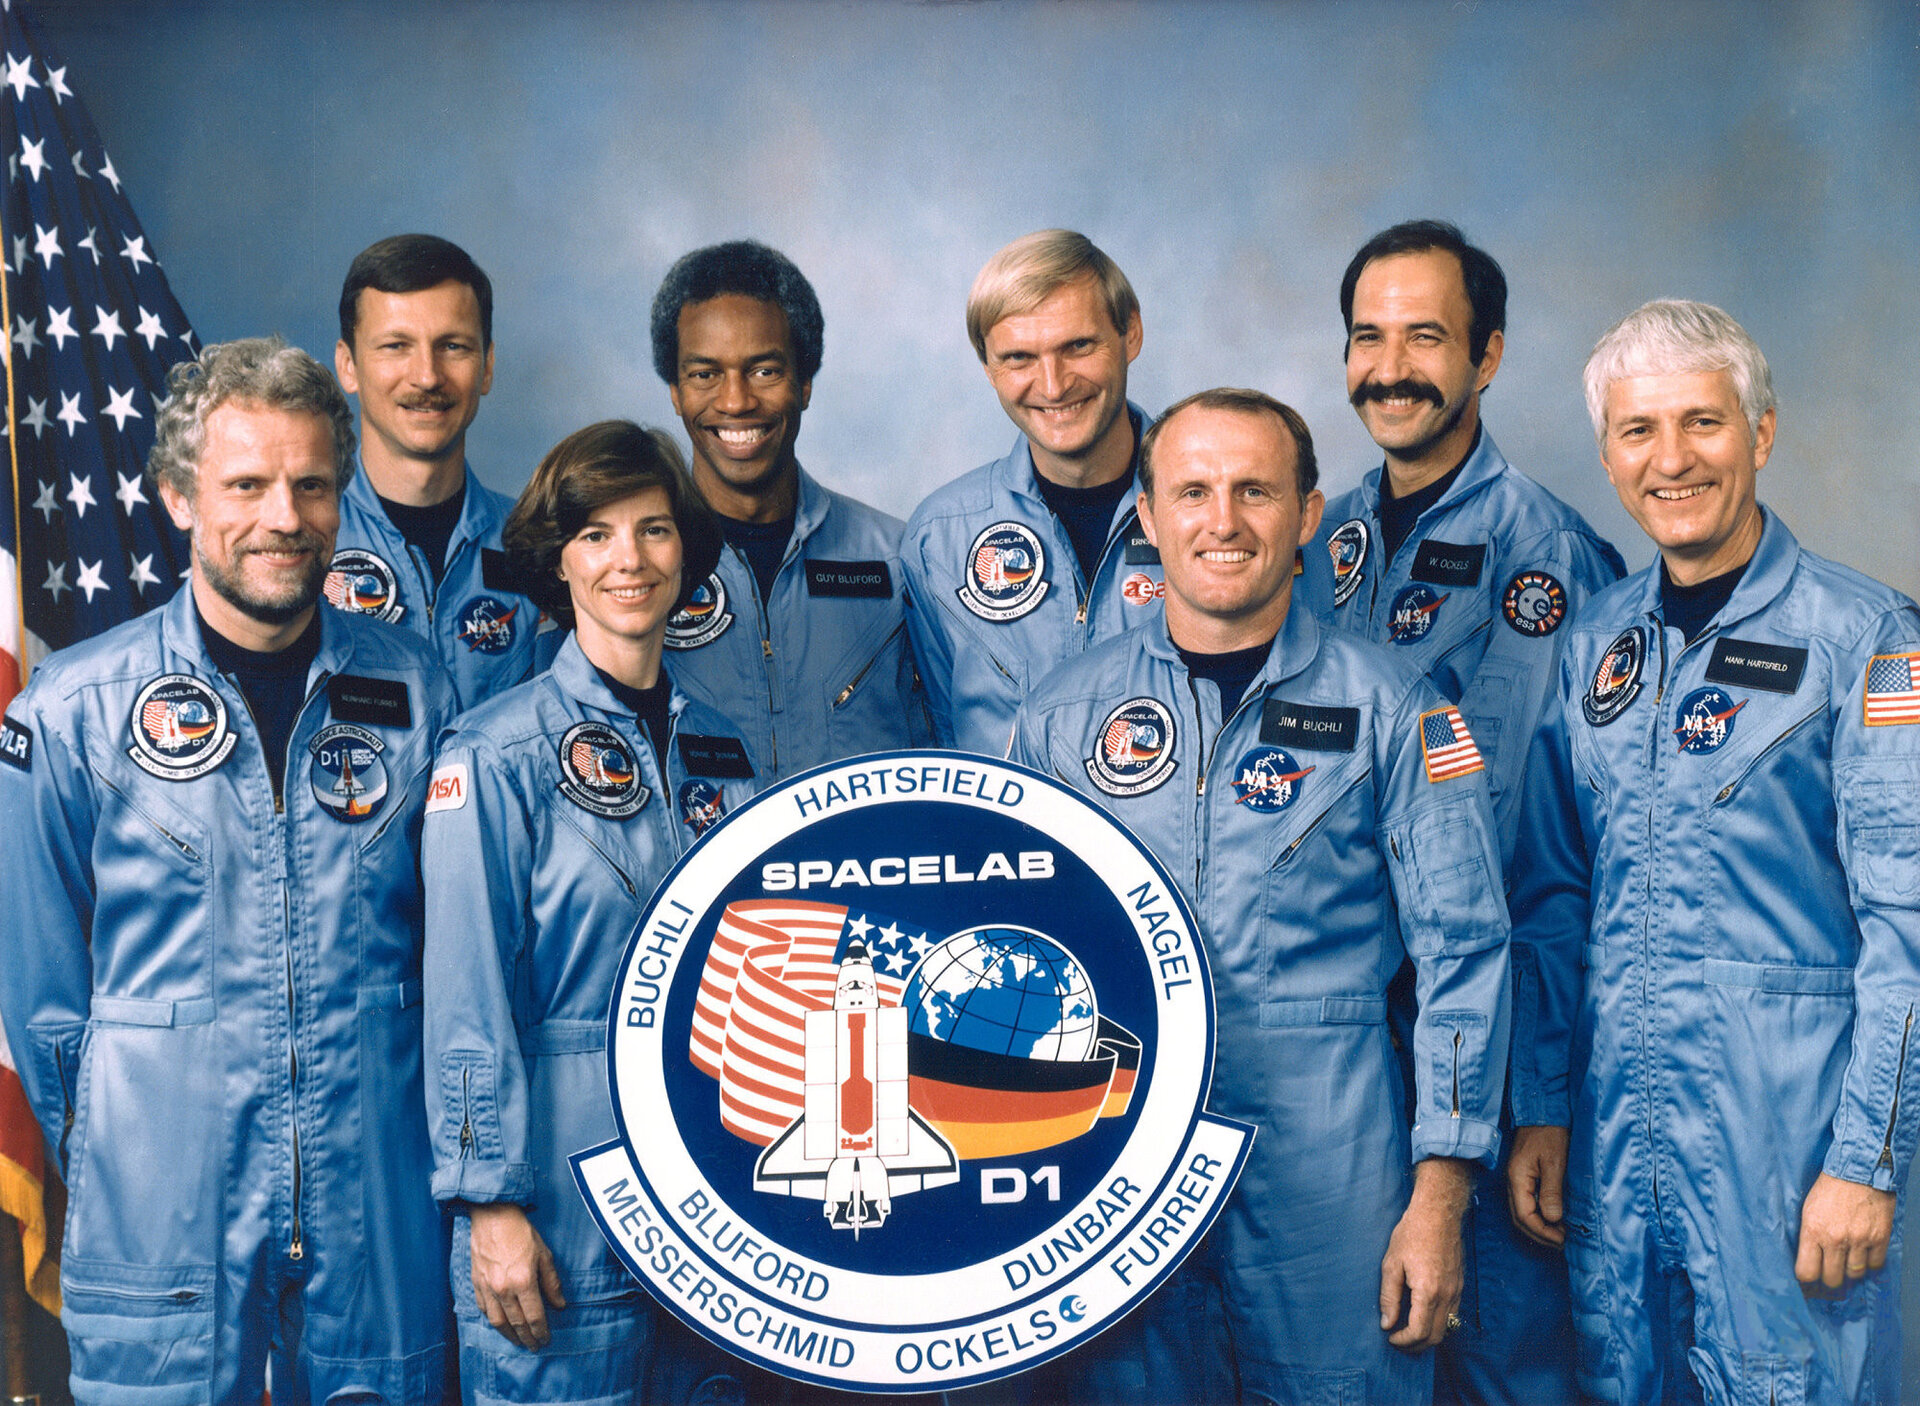 The STS-61A Spacelab D1 crew